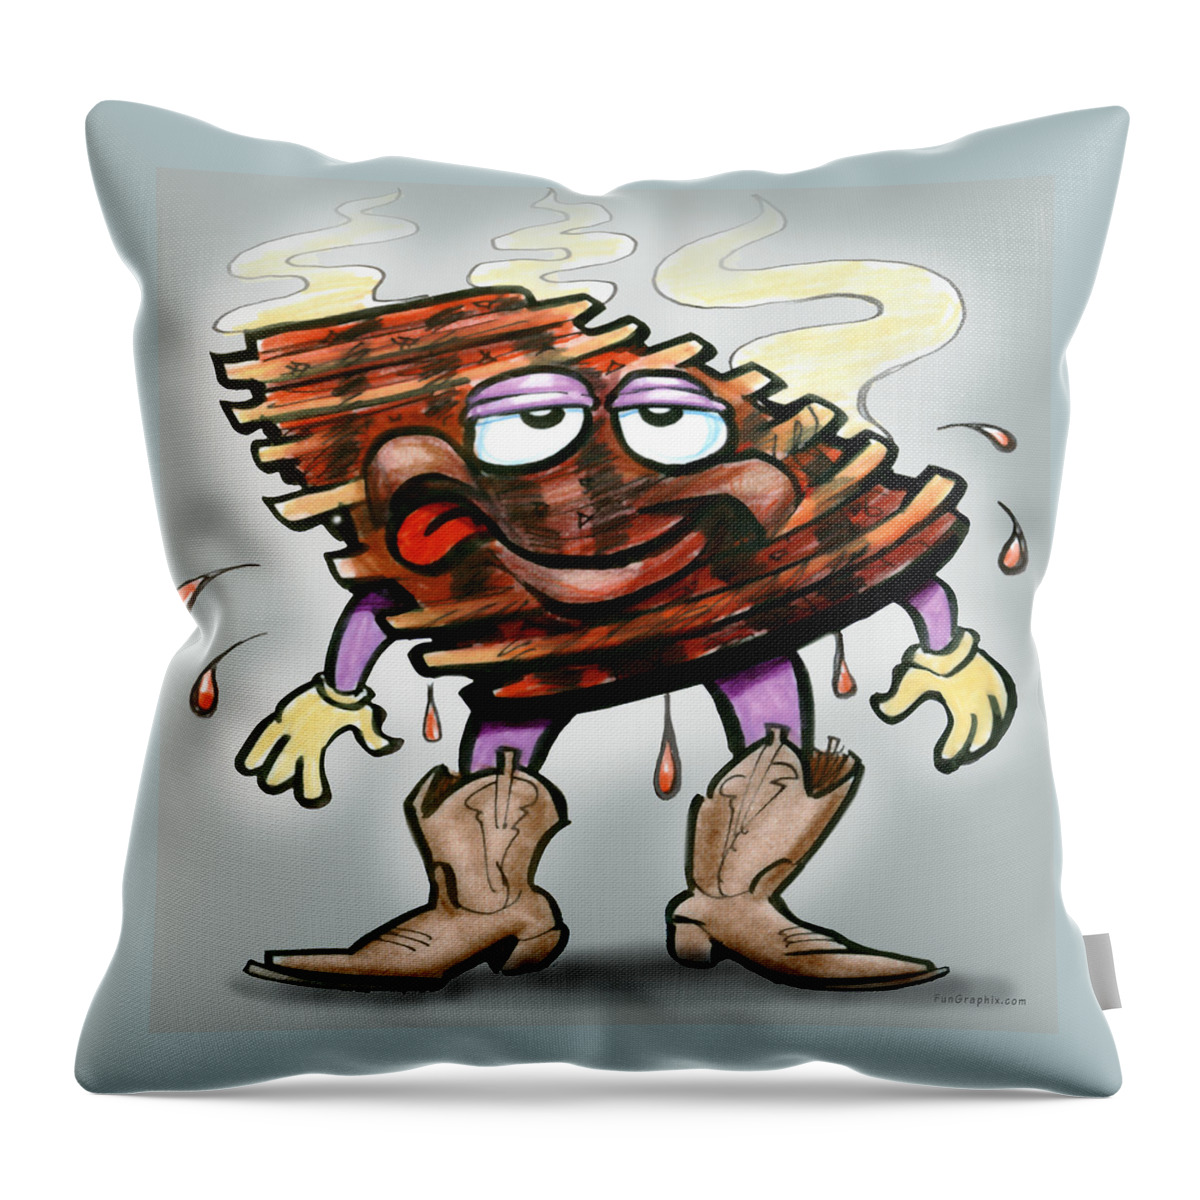 Rib Throw Pillow featuring the digital art Ribs by Kevin Middleton